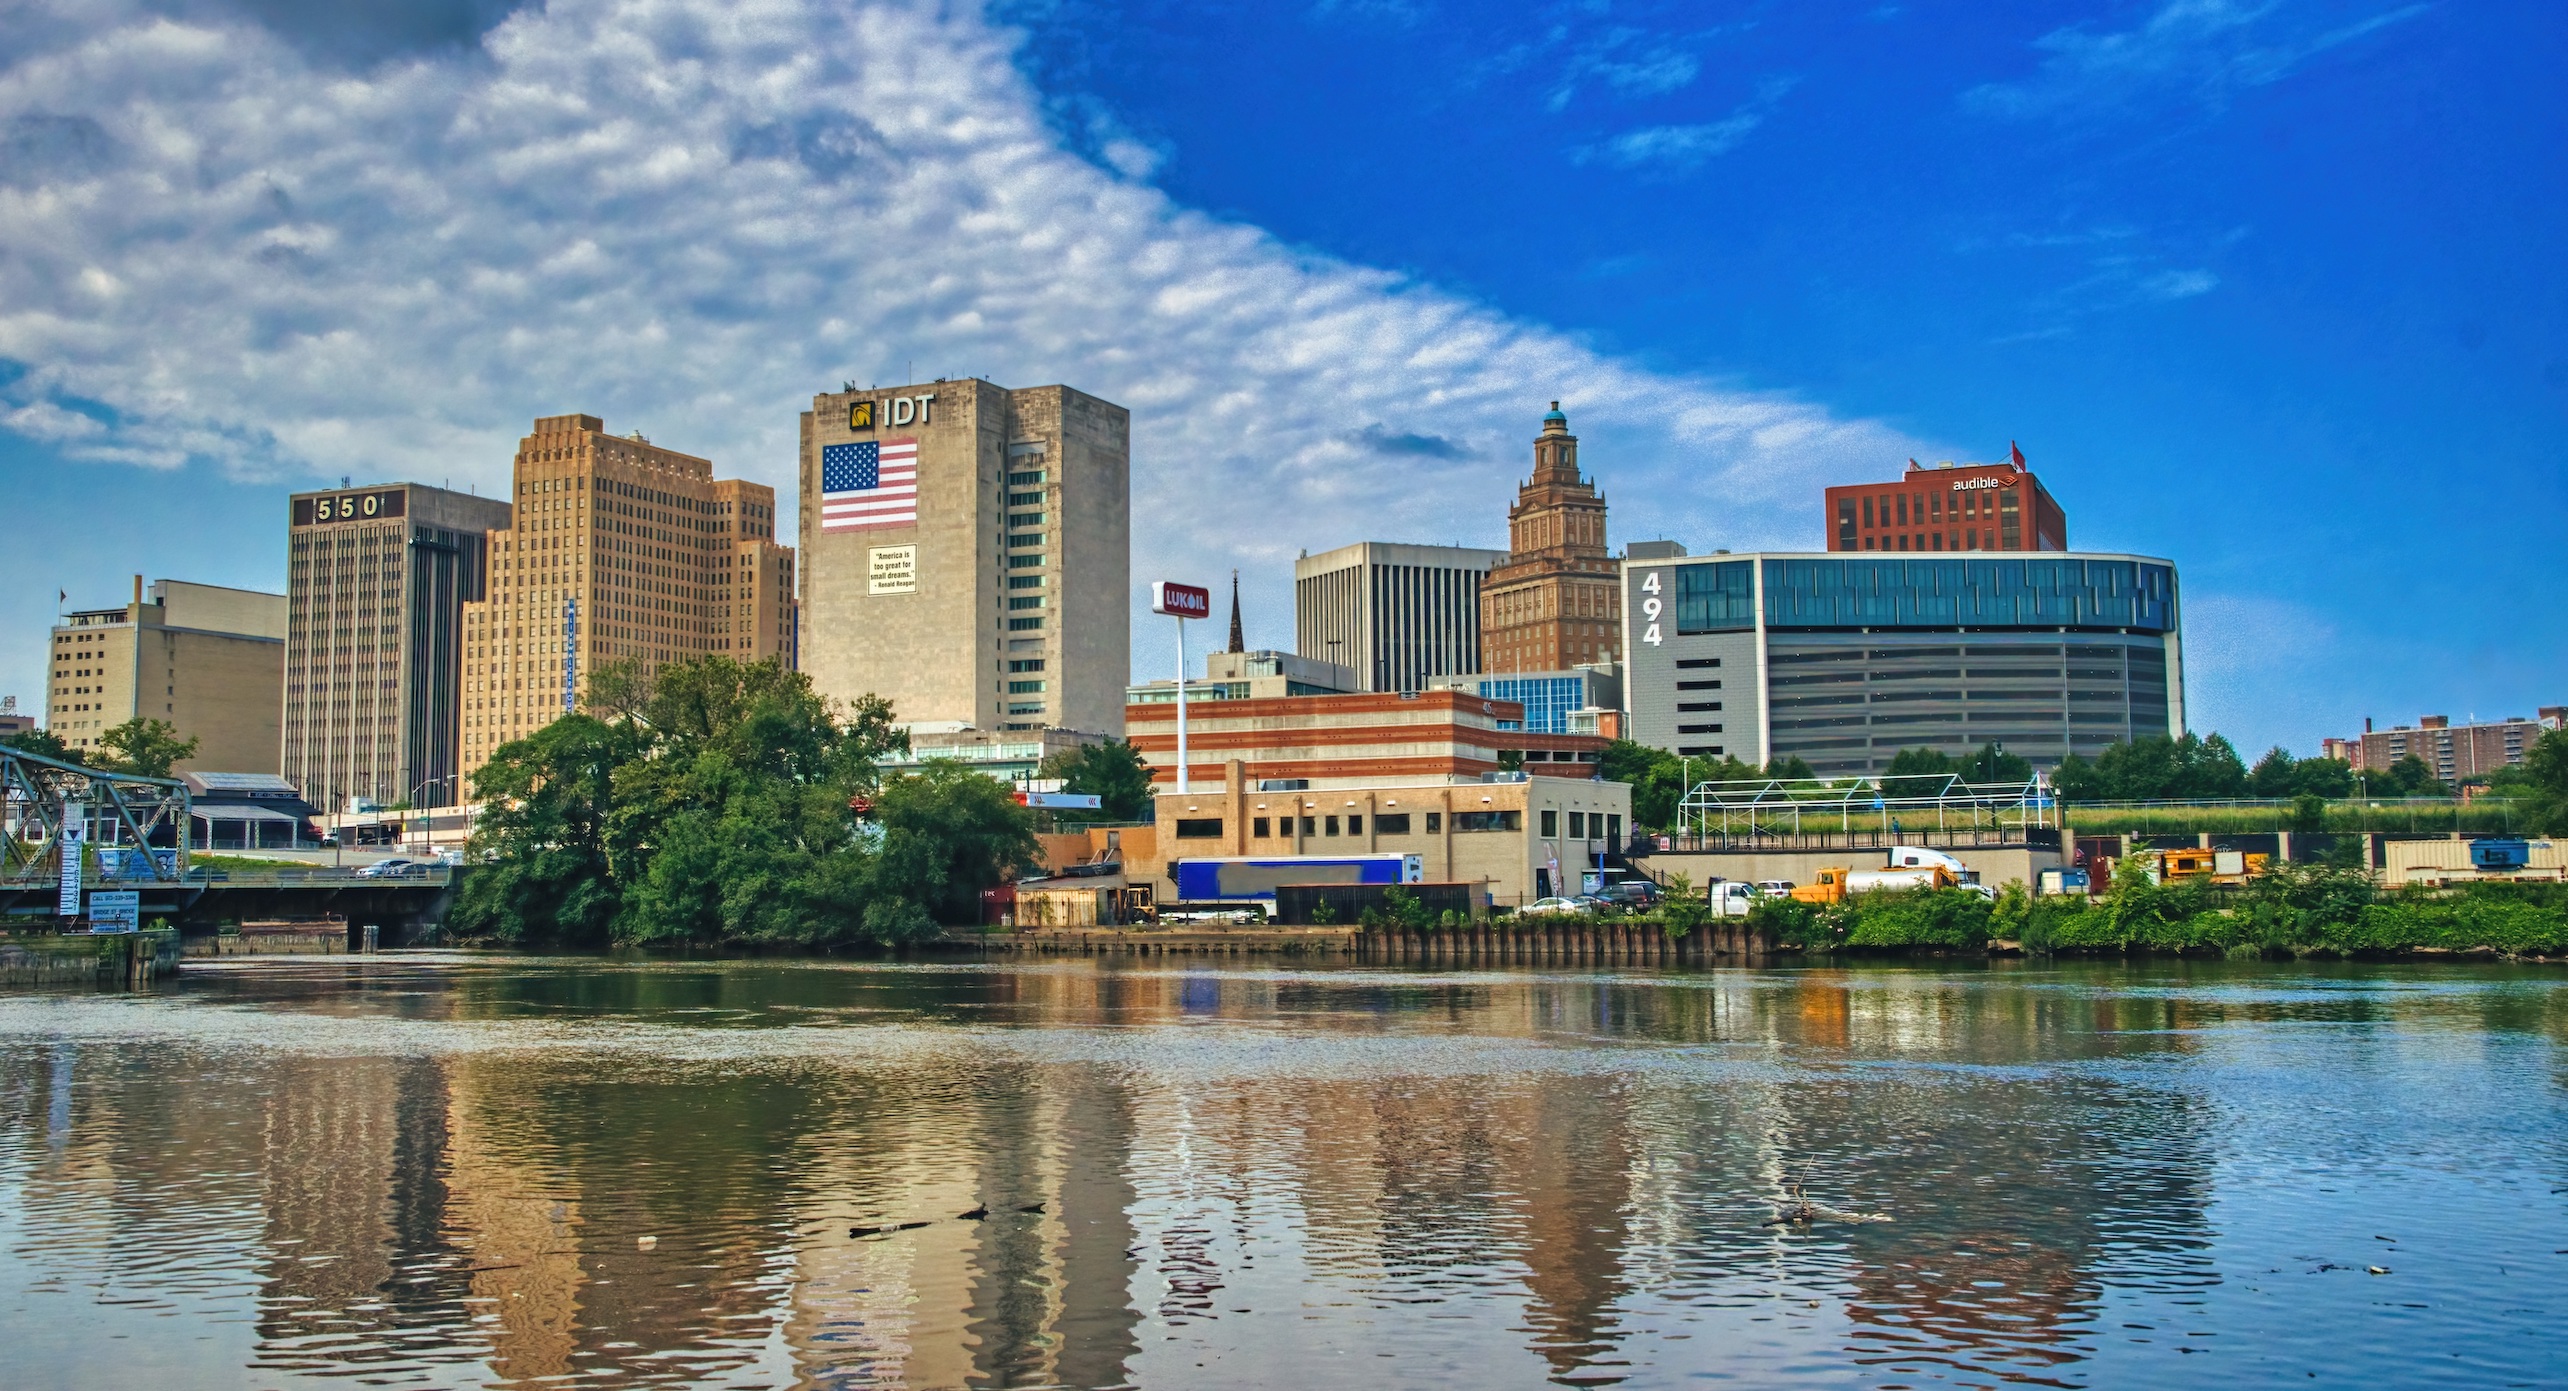 View of Newark by Bruce Emmerling on Pixabay